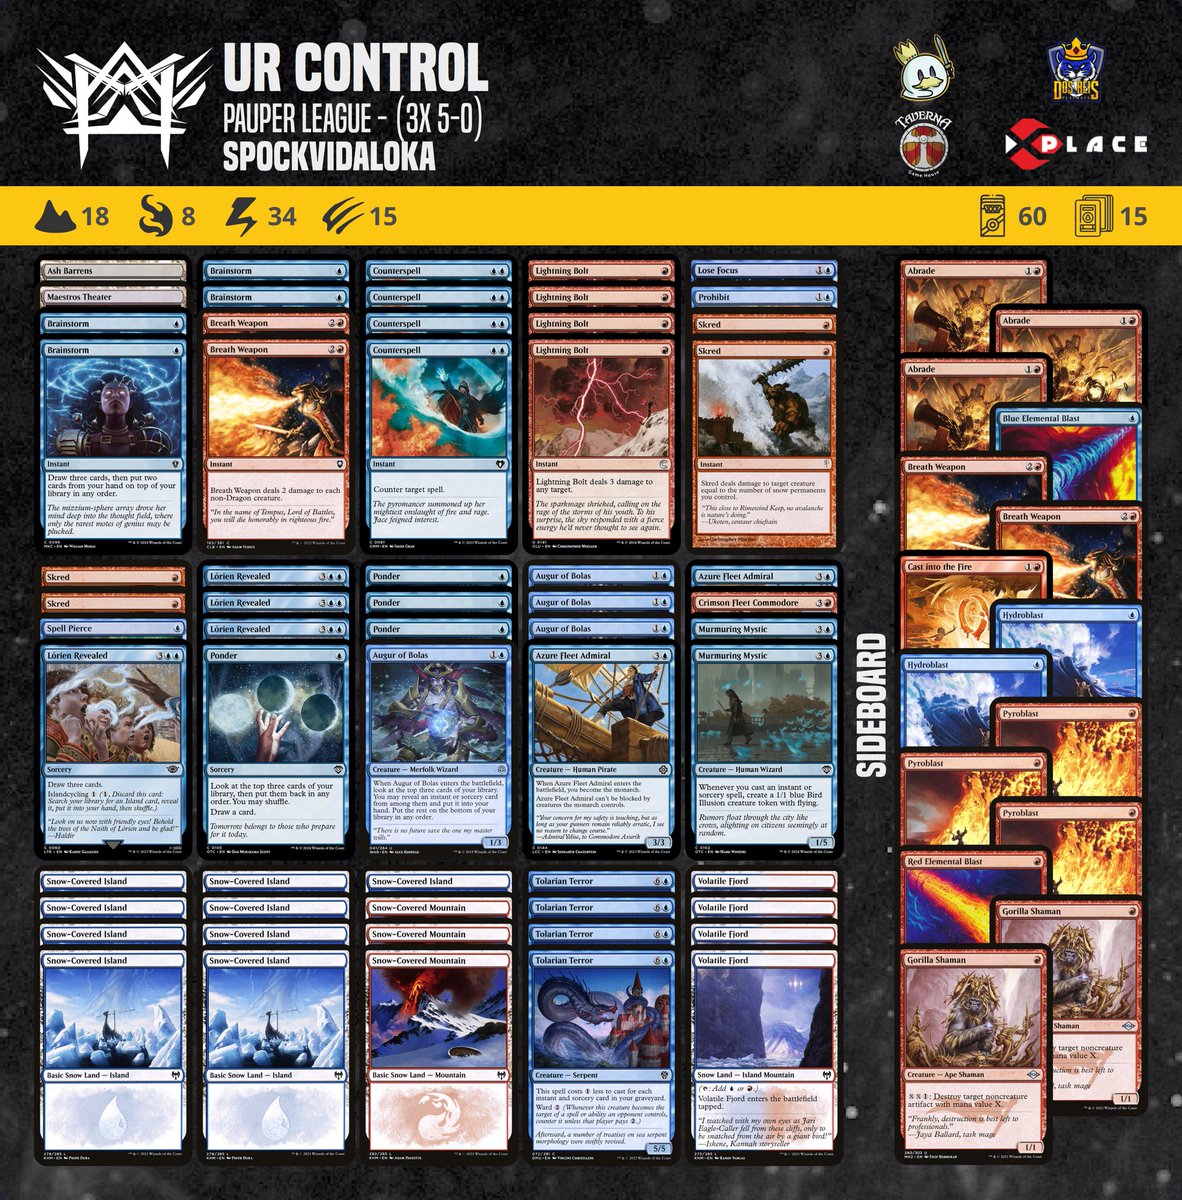 Our athlete @Vini_Spock achieved 3x 5-0 victories in the Pauper League tournament with this UR Control decklist.

#pauper  #magic #mtgcommon #metagamepauper #mtgpauper #magicthegathering #wizardsofthecoast 

@PauperDecklists @fireshoes